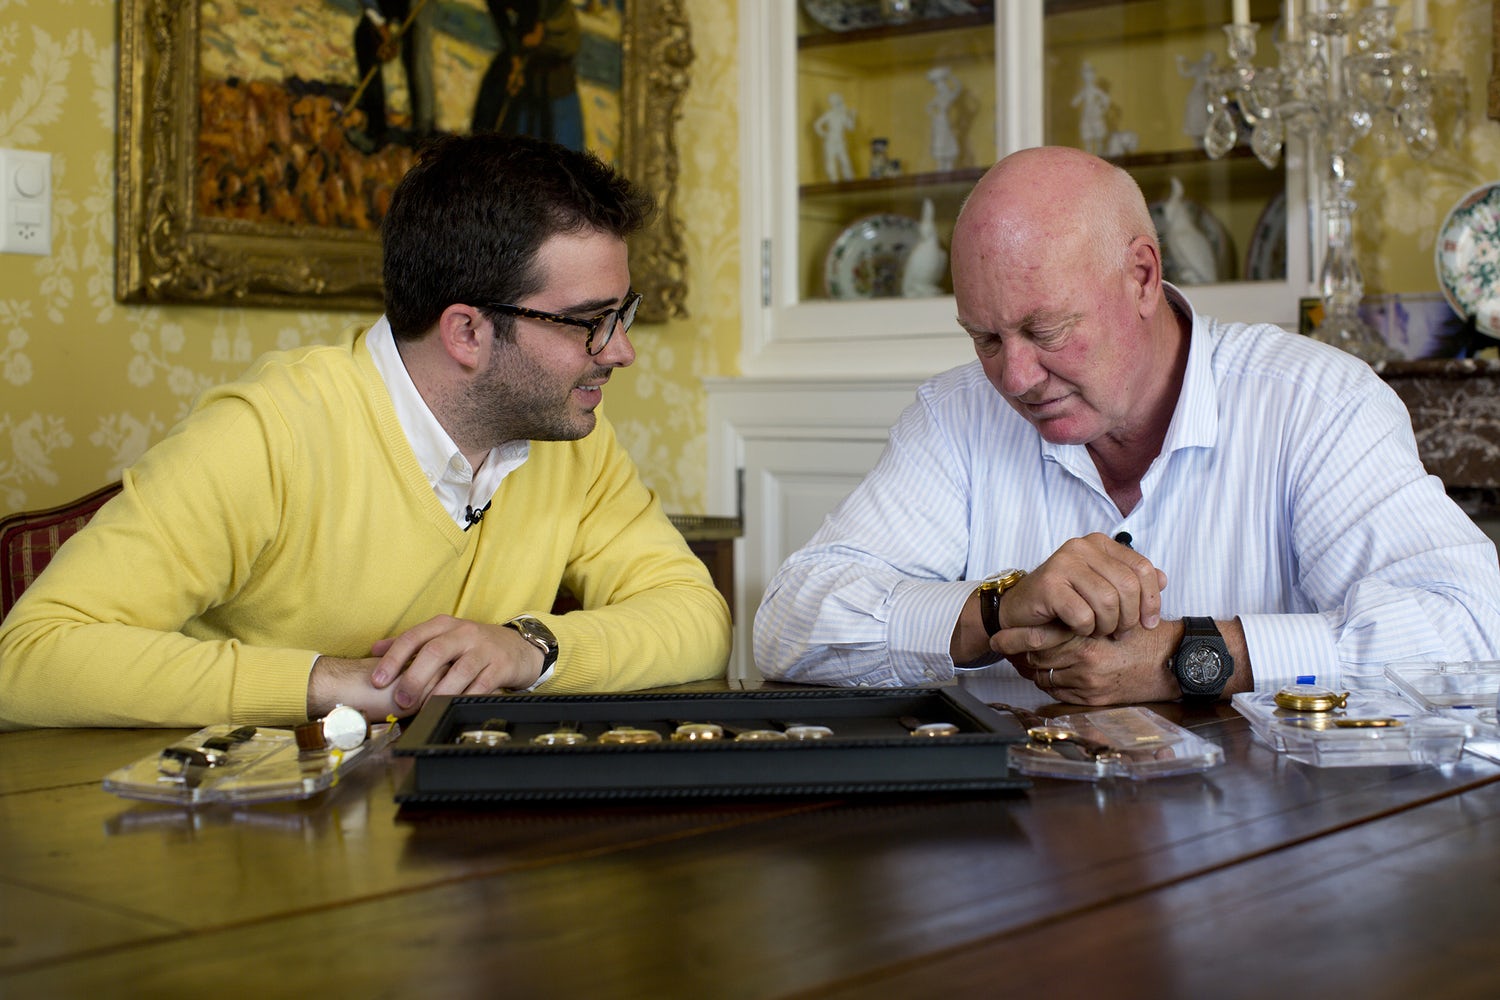 Jean-Claude Biver is so much more than a successful Swiss watch boss, British GQ